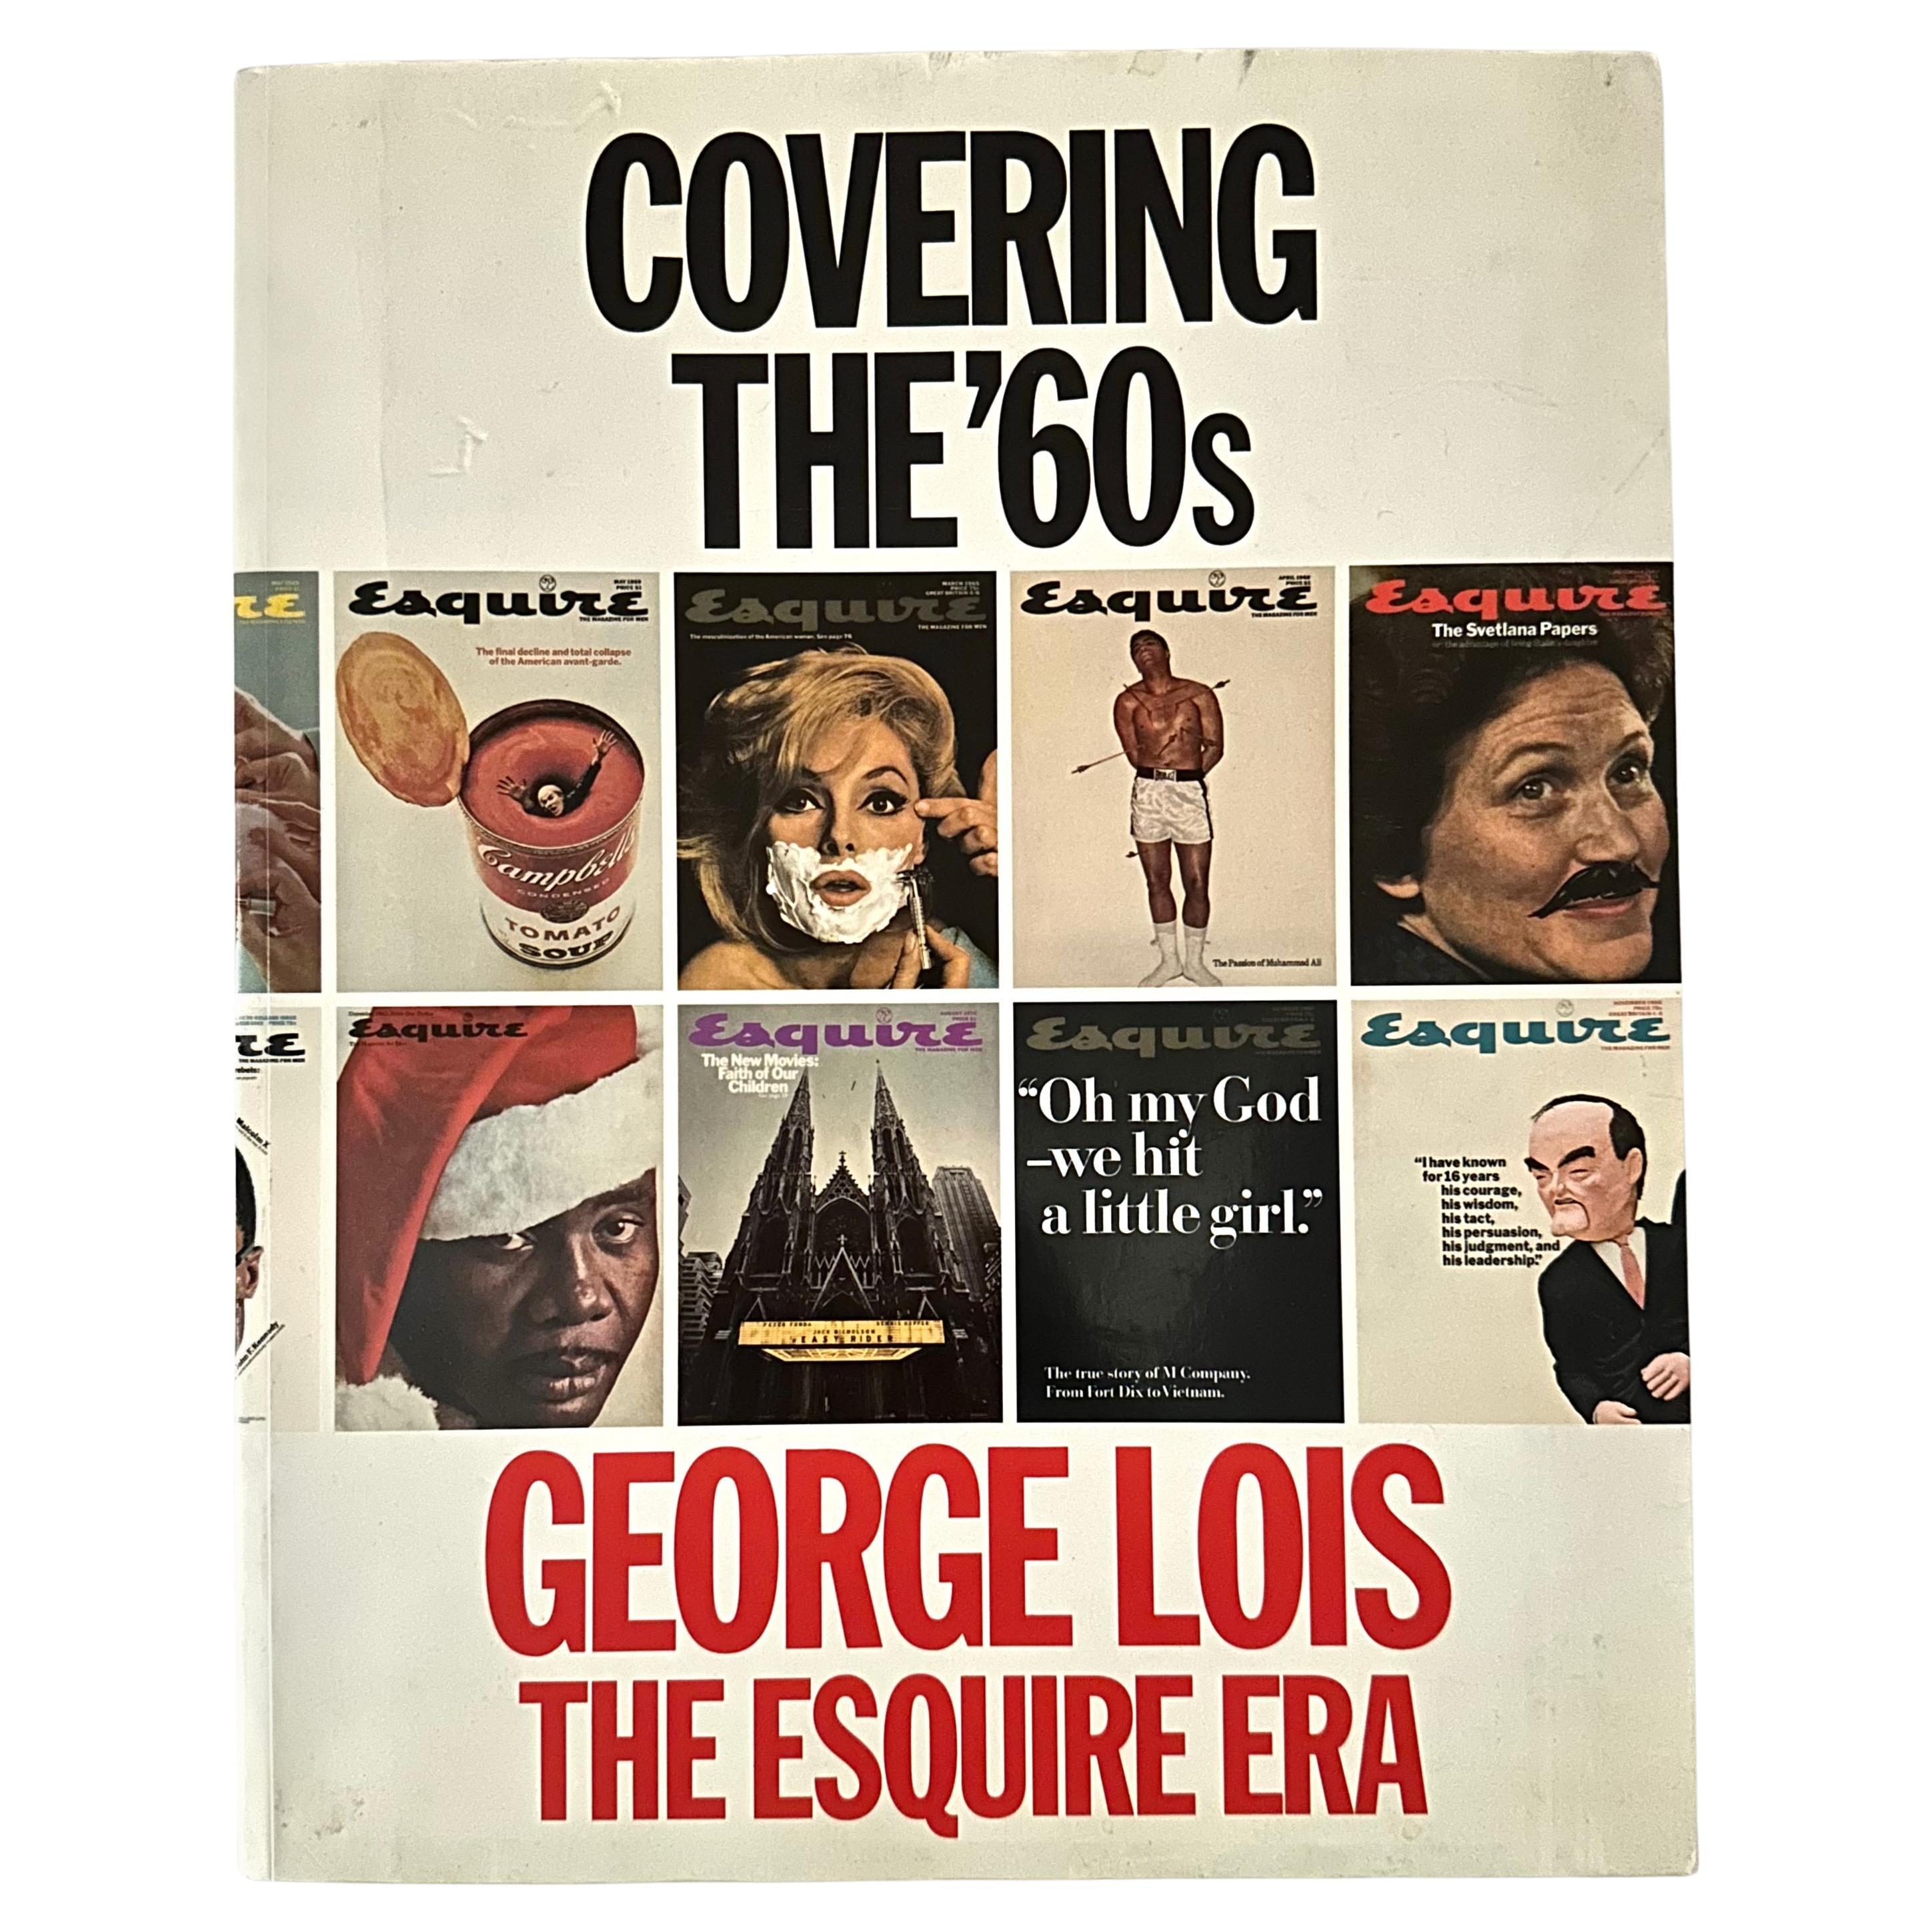 Covering the '60s: George Lois, The Esquire Era - 1st edition, New York, 1996